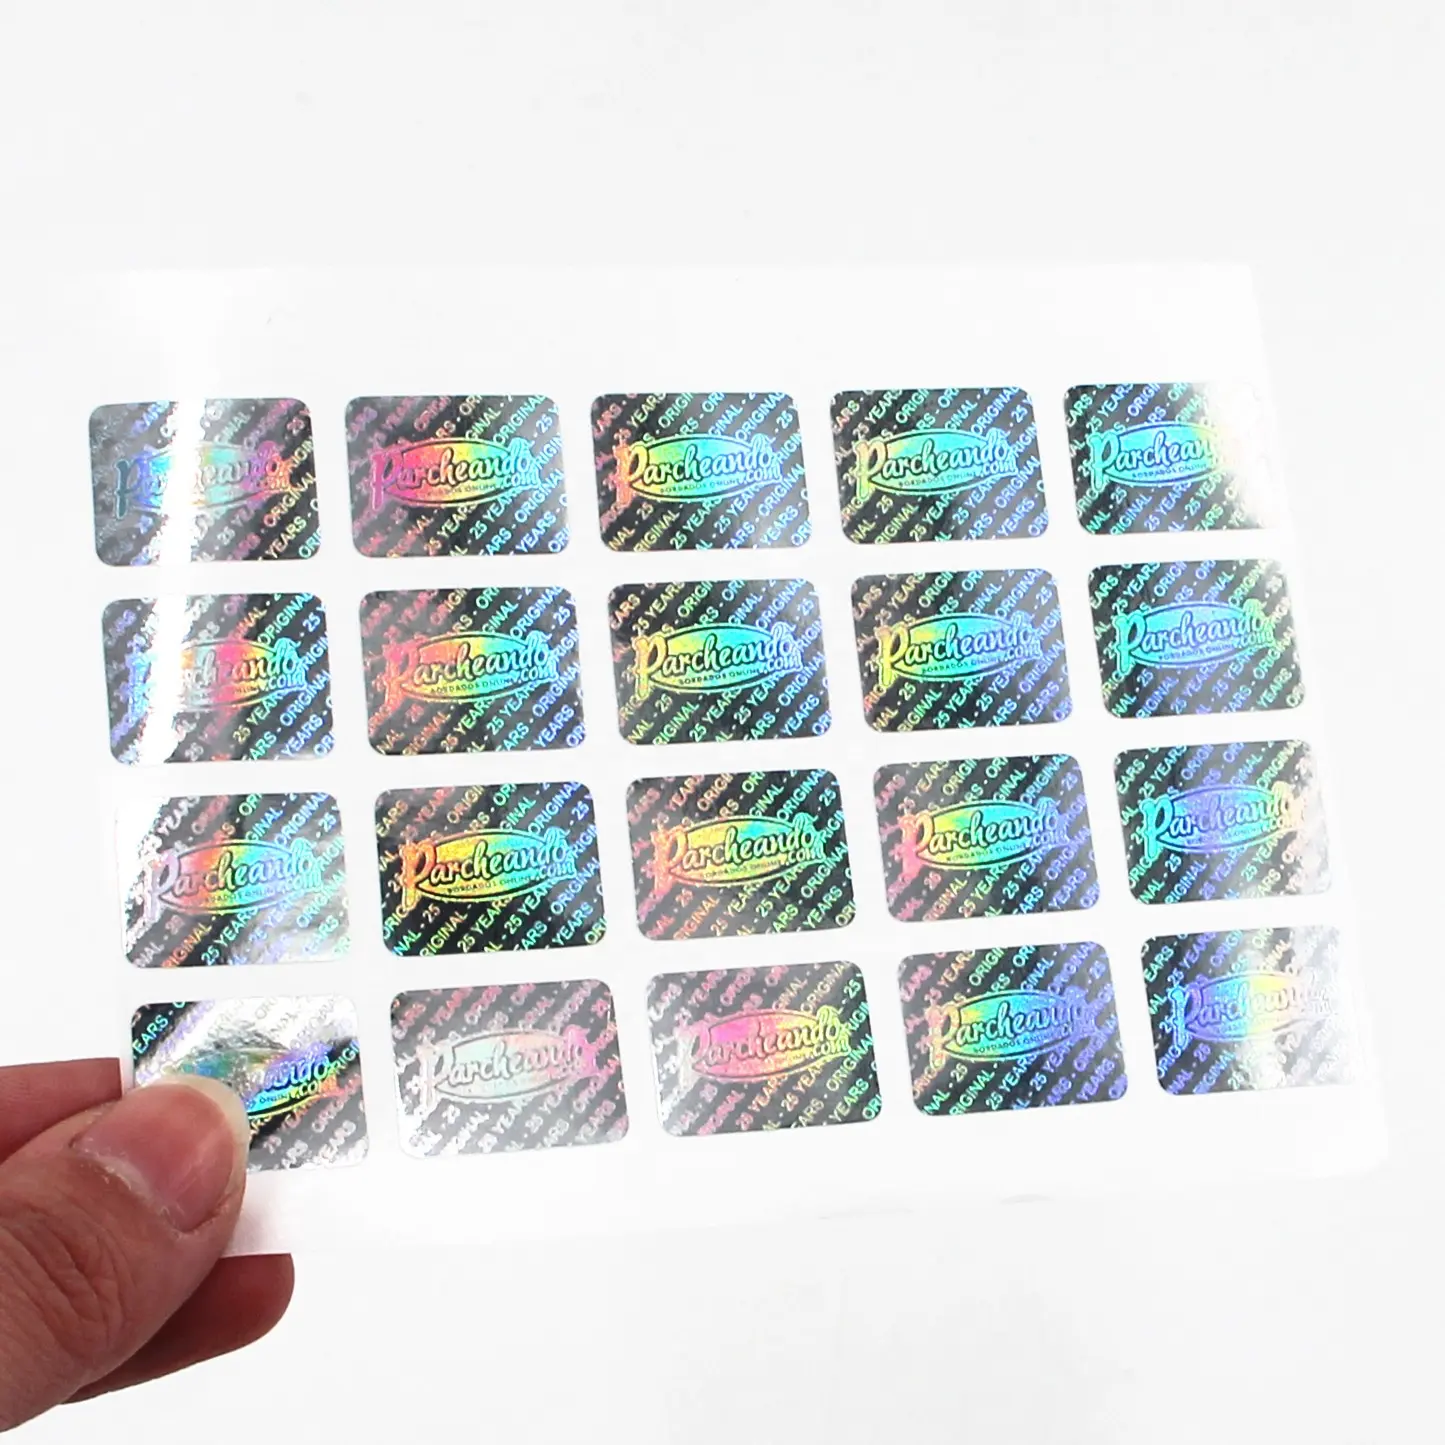 New Hologram Stickers for Package Custom Stickers Holographic Waterproof Stickers for Packaging Security